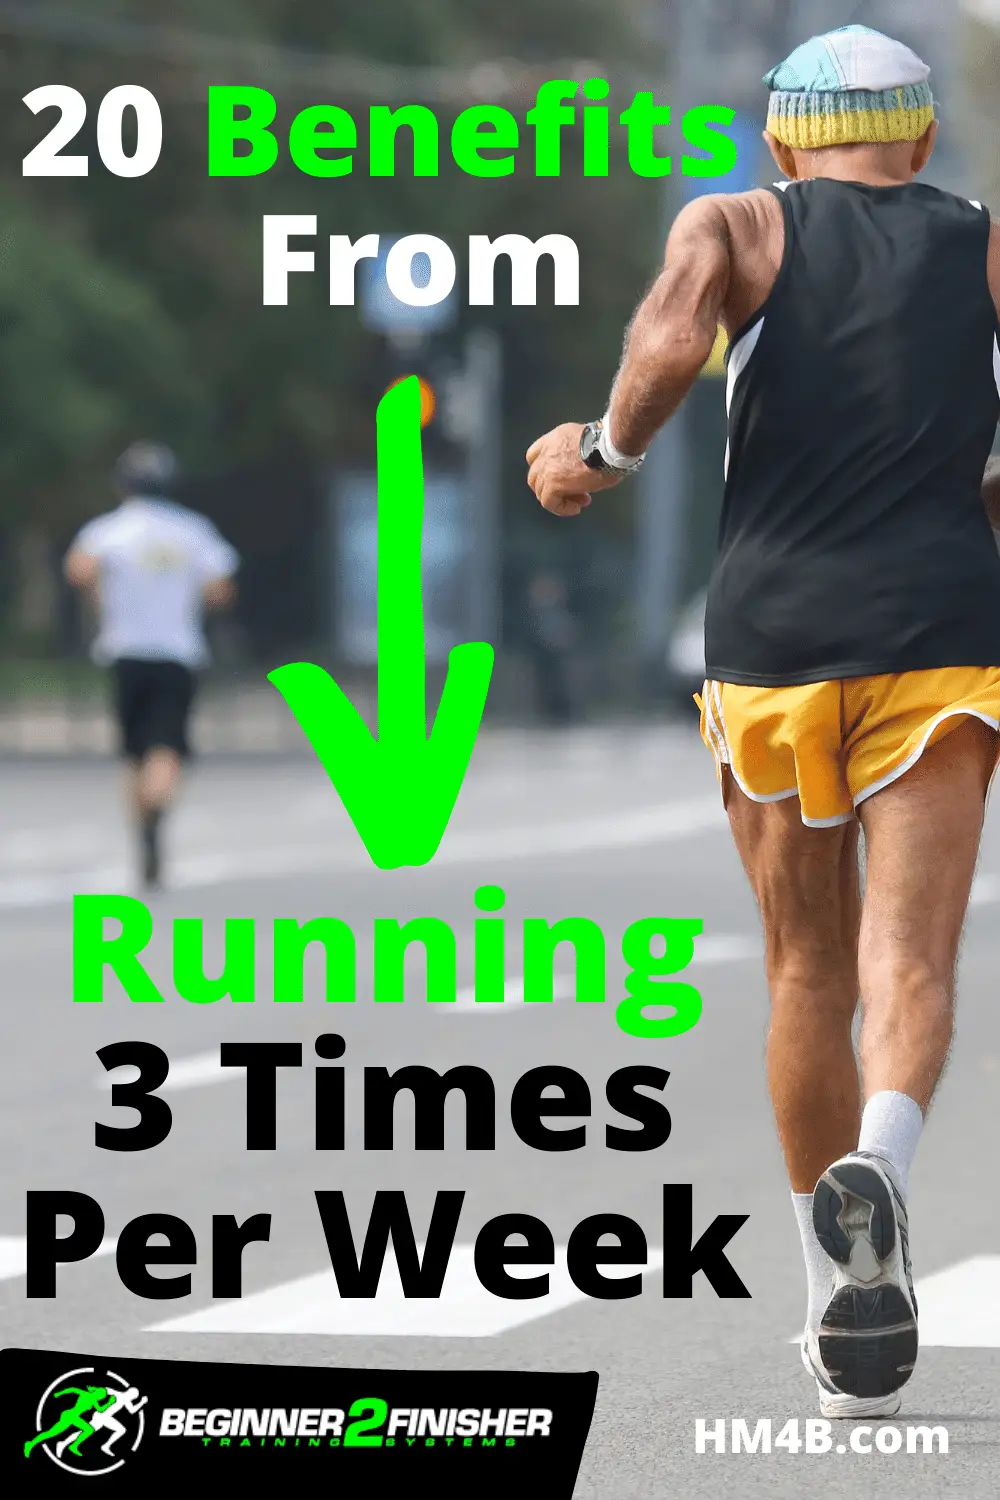 20 Benefits Of Running 3 Times A Week - Your Key To A Healthier Life!